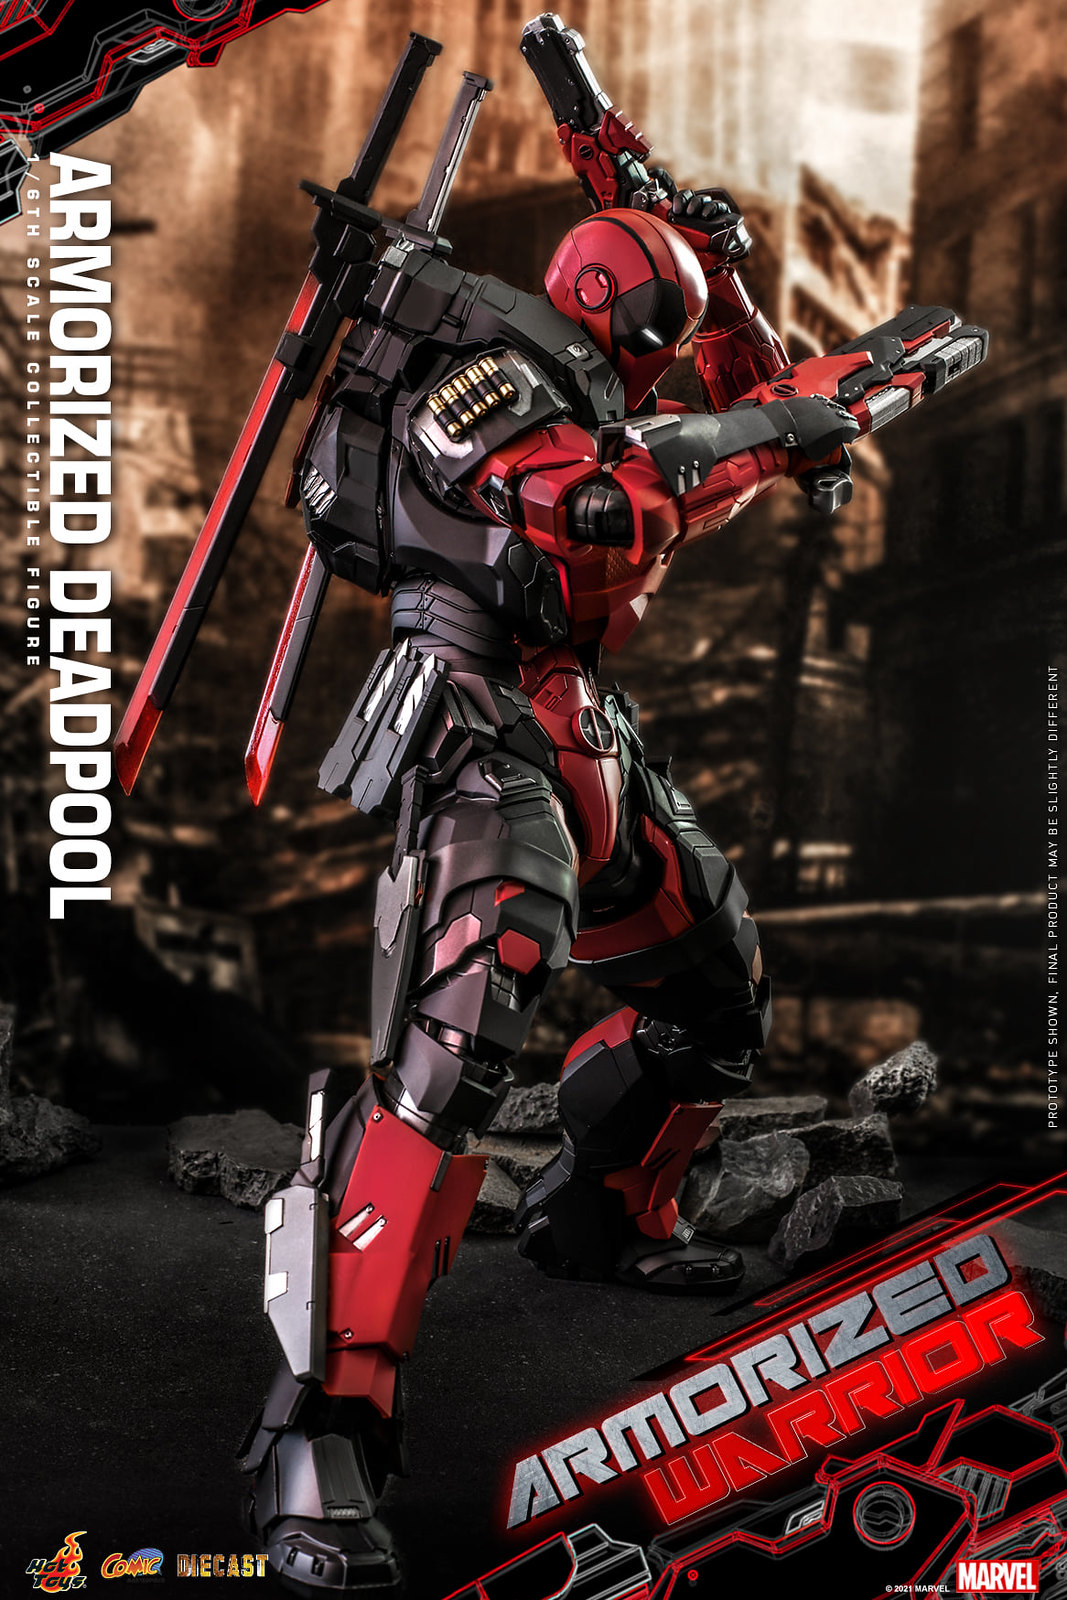 NEW PRODUCT: Hot Toys Armorized Warrior - 1/6th scale Armorized Deadpool Collectible Figure [Armorized Warrior Collection] 51311964764_1a763f6eff_h